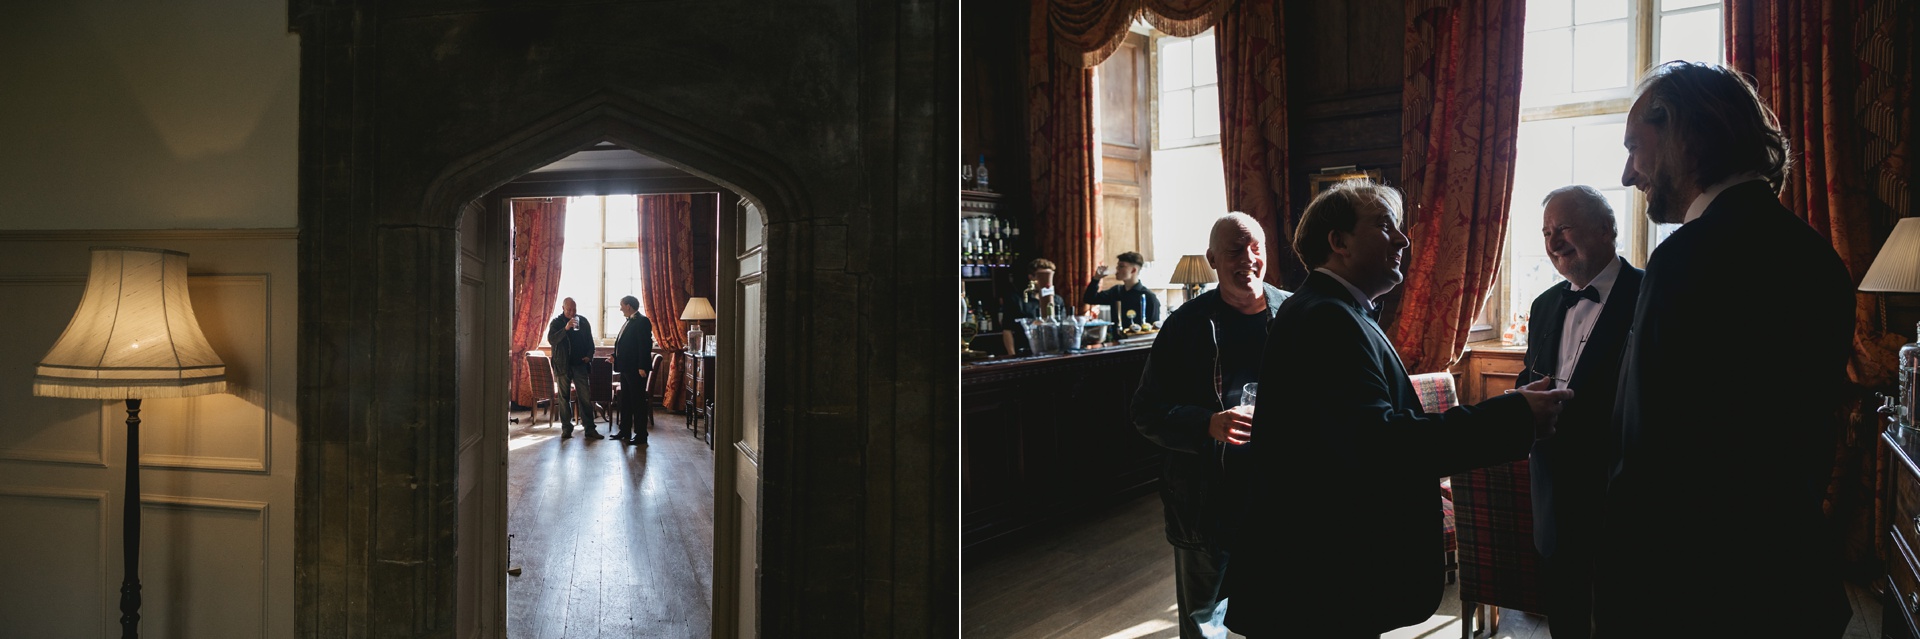 Wedding guests in the bar at Brympton House